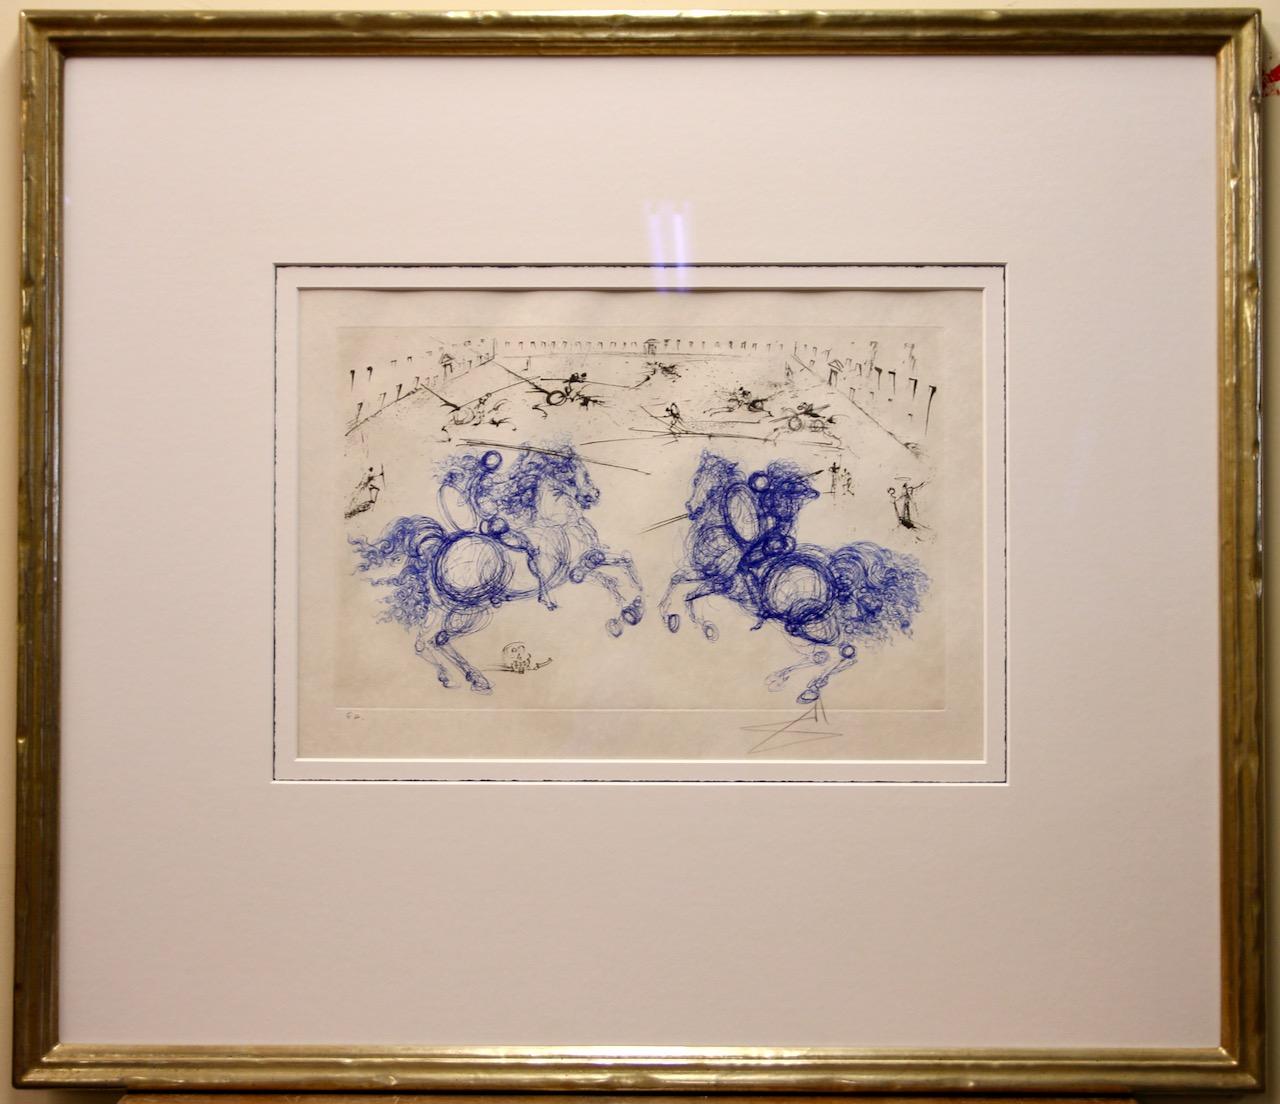 Salvador Dalí Abstract Painting - Salvador Dali "Combat de Cavaliers" Hand-signed Drypoint Etching E.A.